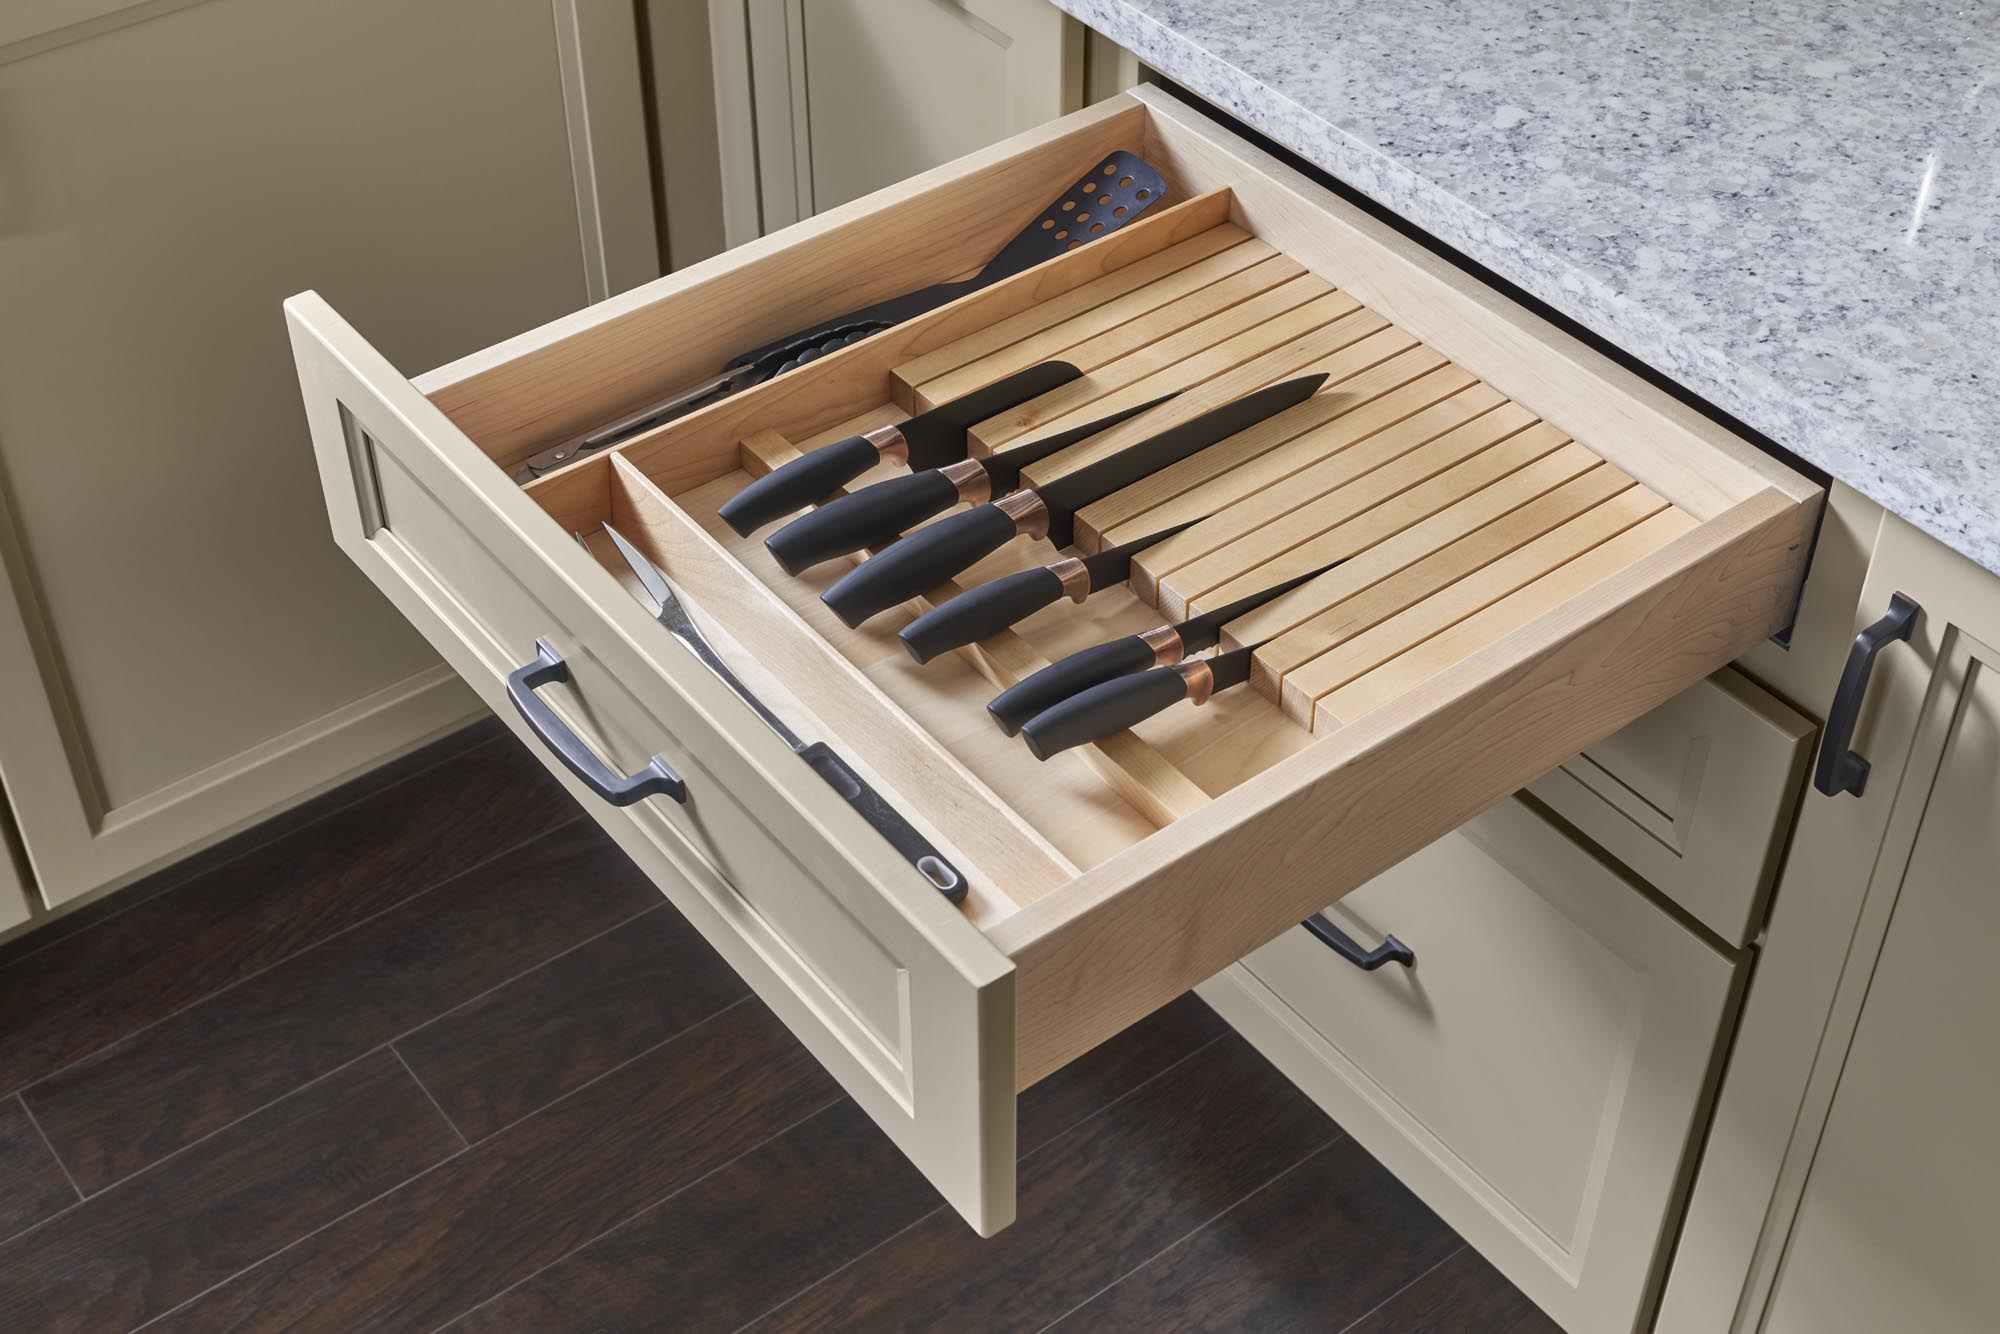 Knife Drawer Insert for 24-inch deep cabinets